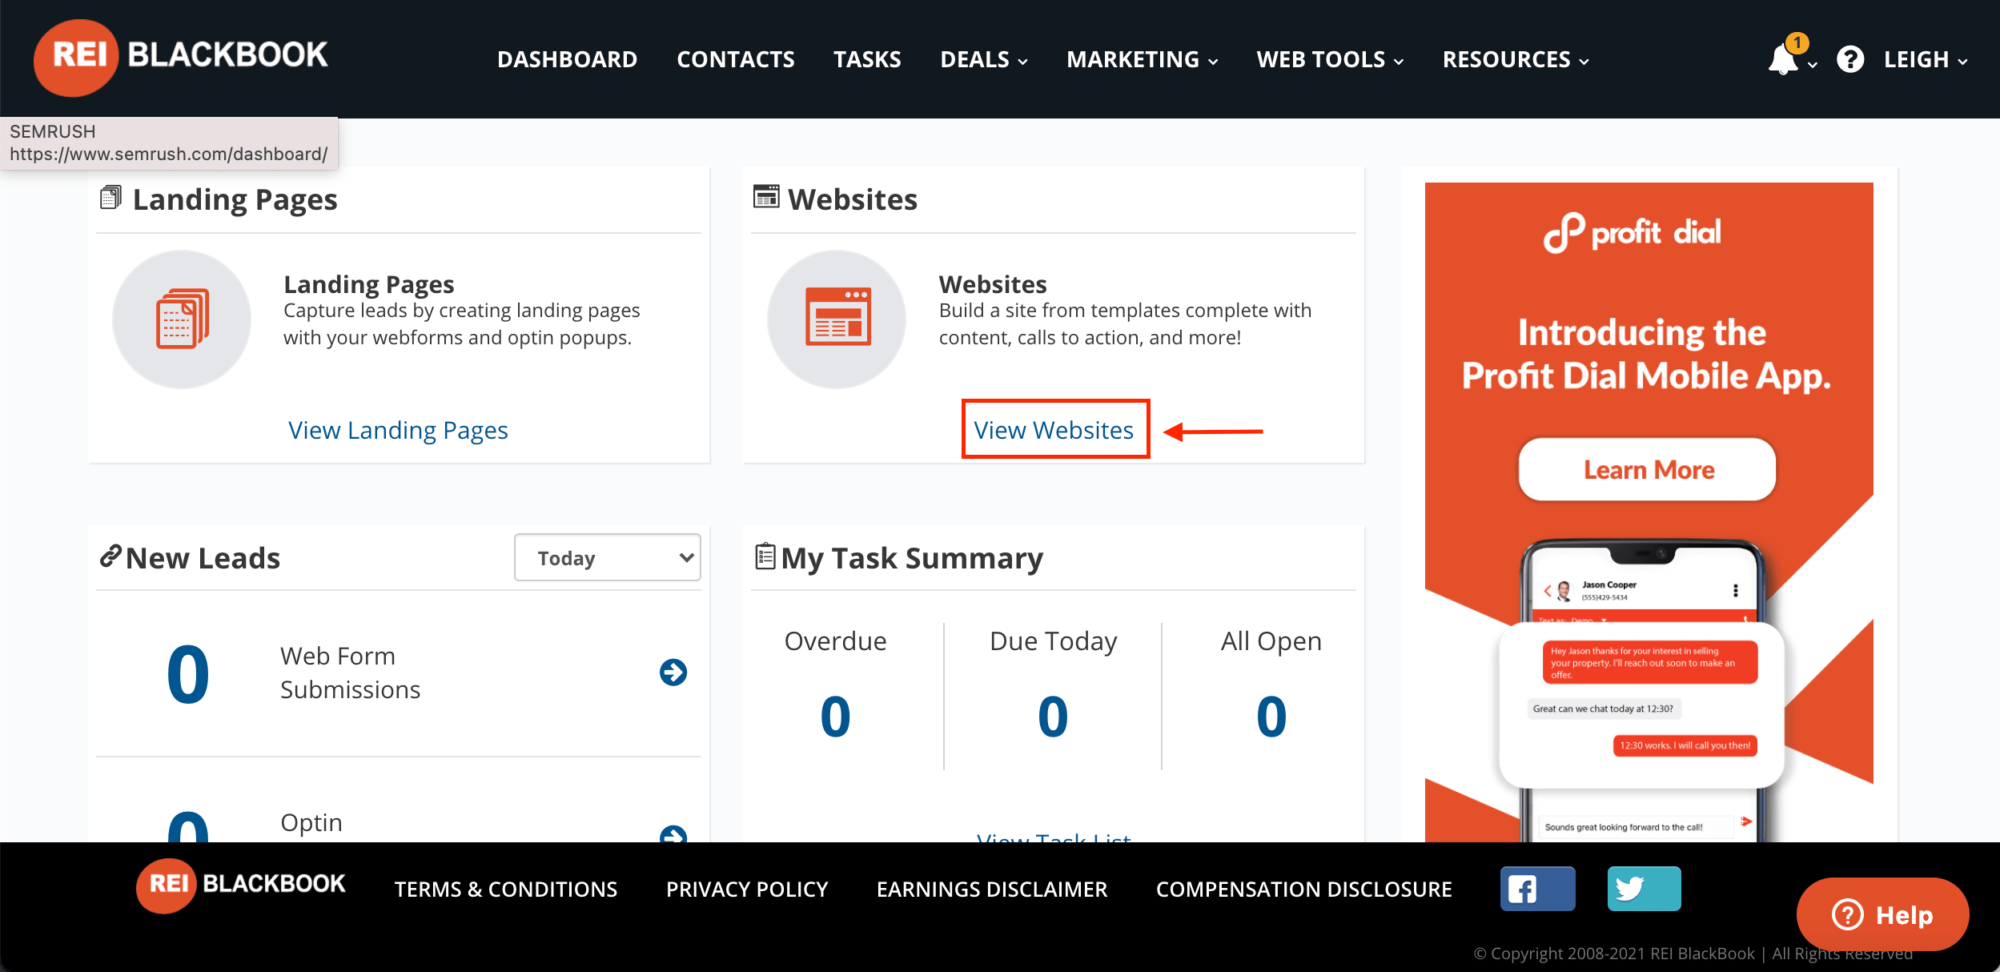 To create a landing page from your existing website template in REI Blakbook, click "View Websites" from the dashboard.